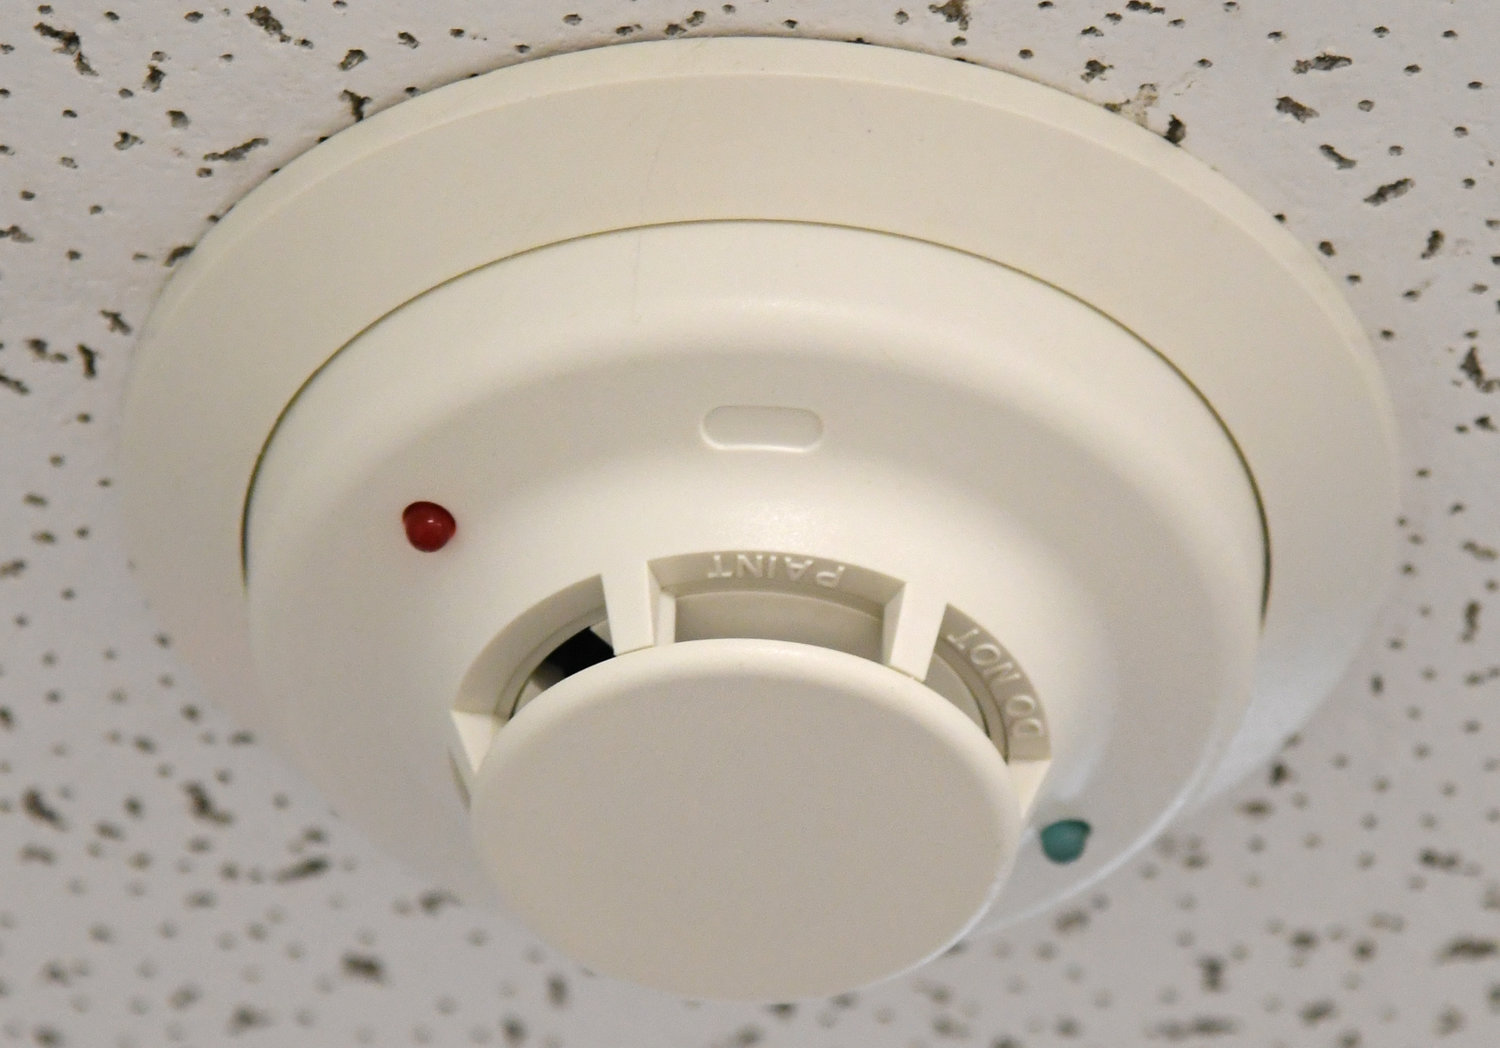 State firefighting association officials urge all residents to check their fire alarms and smoke detectors this weekend, replacing batteries and/or detectors if needed.